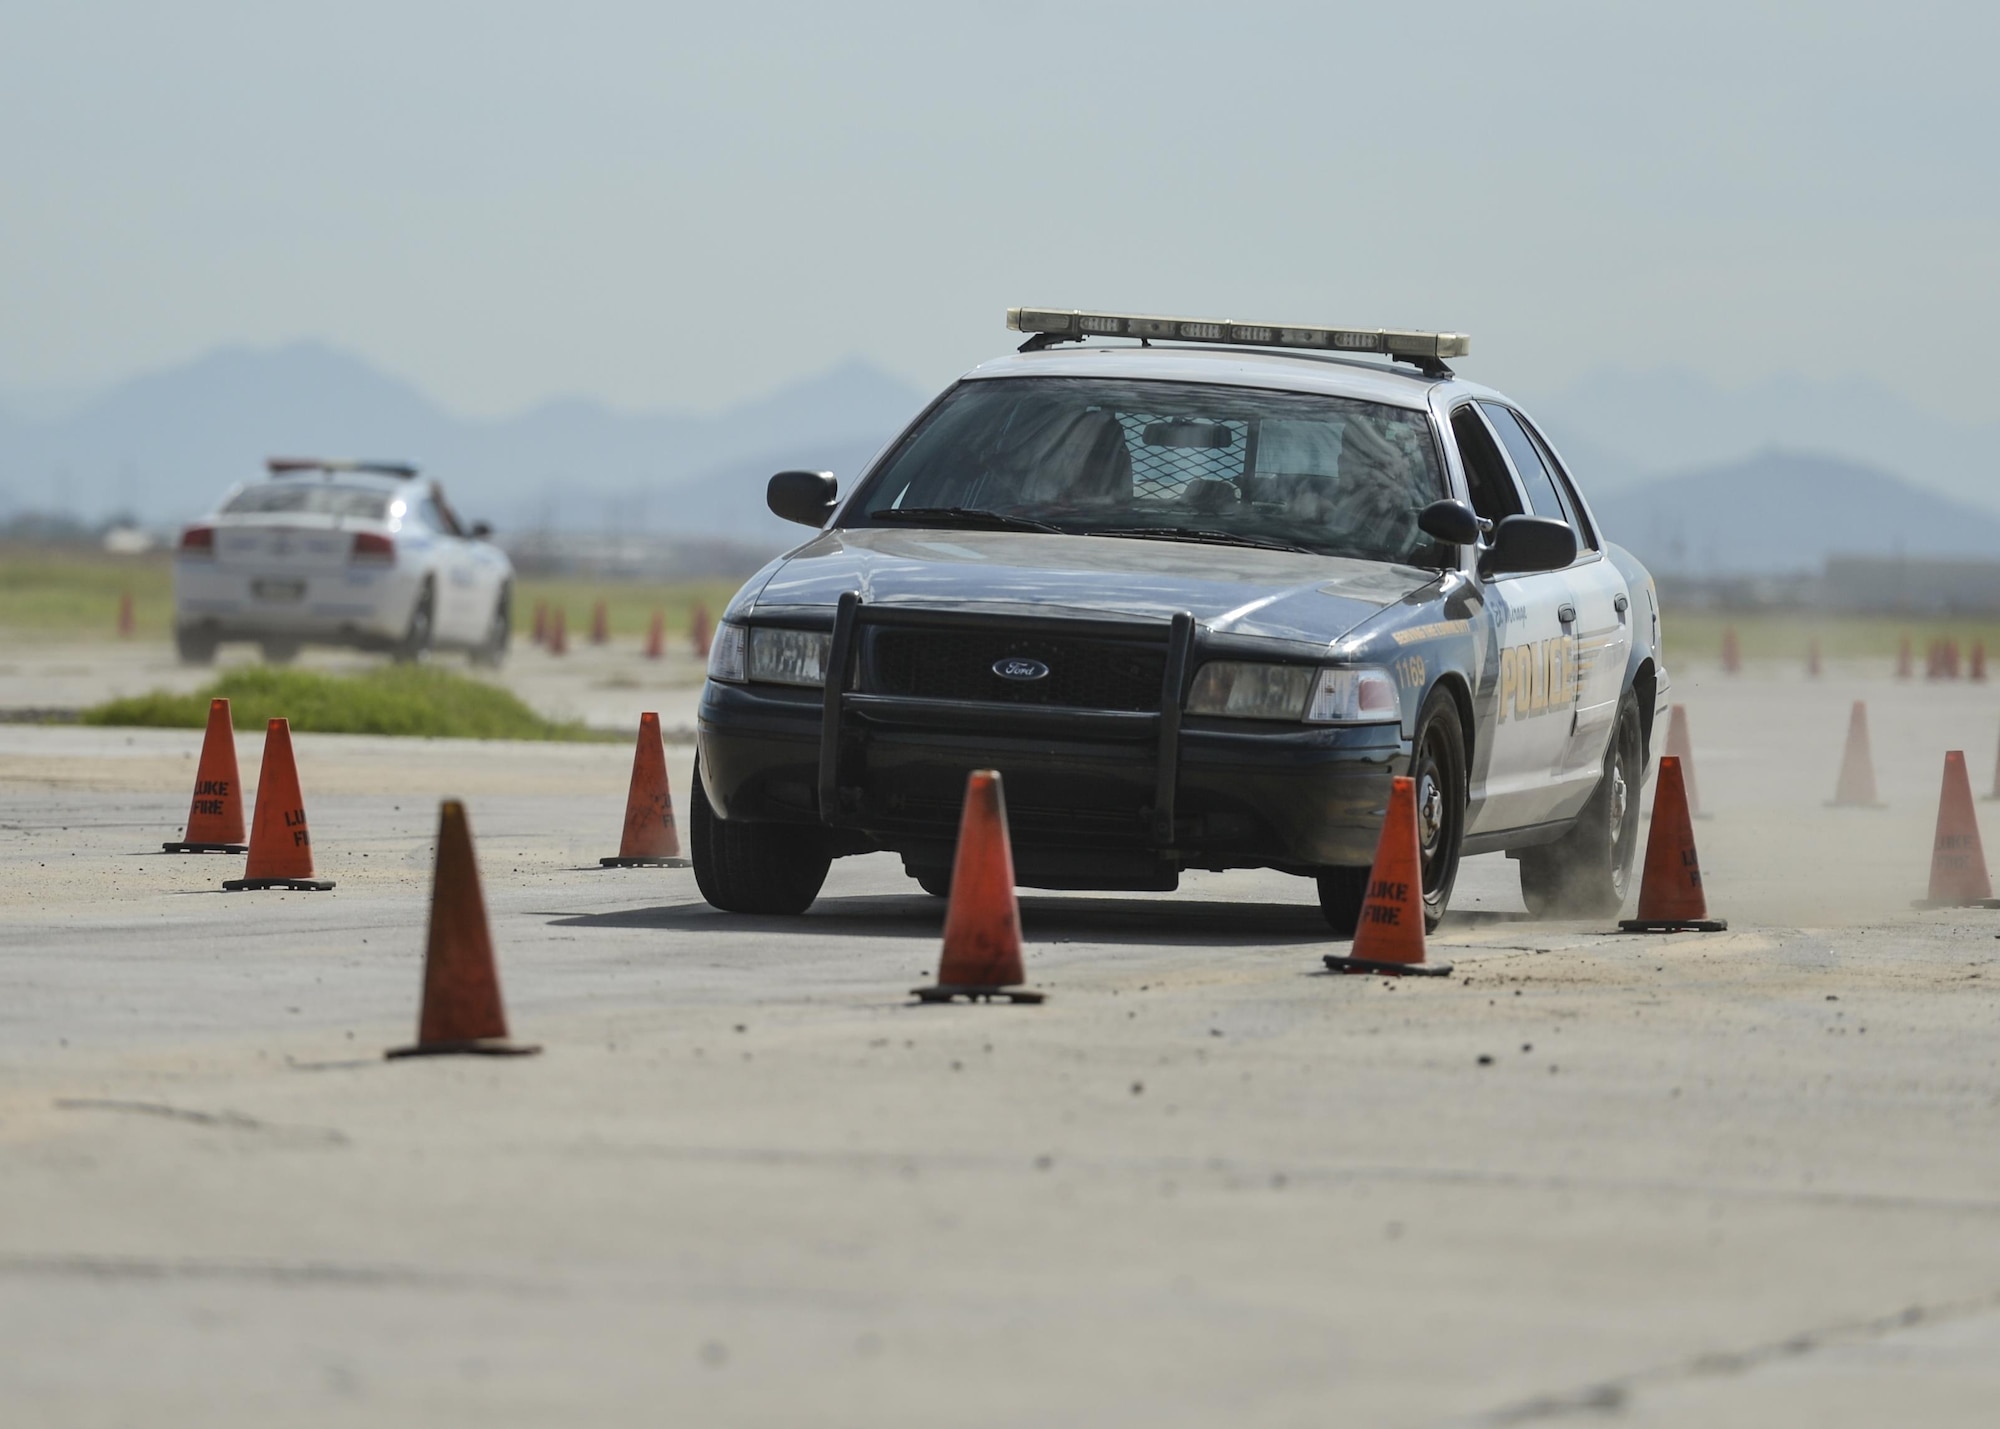 A city of El Mirage police cruiser is driven through a staged as part of an Emergency Vehicle Operations Course held at Luke Air Force Base, Ariz., Aug. 23, 2017. The EVOC training is scheduled to take place in the future as part of an ongoing partnership between local police departments and Luke Air Force Base. (U.S. Air Force photo/Airman 1st Class Caleb Worpel)